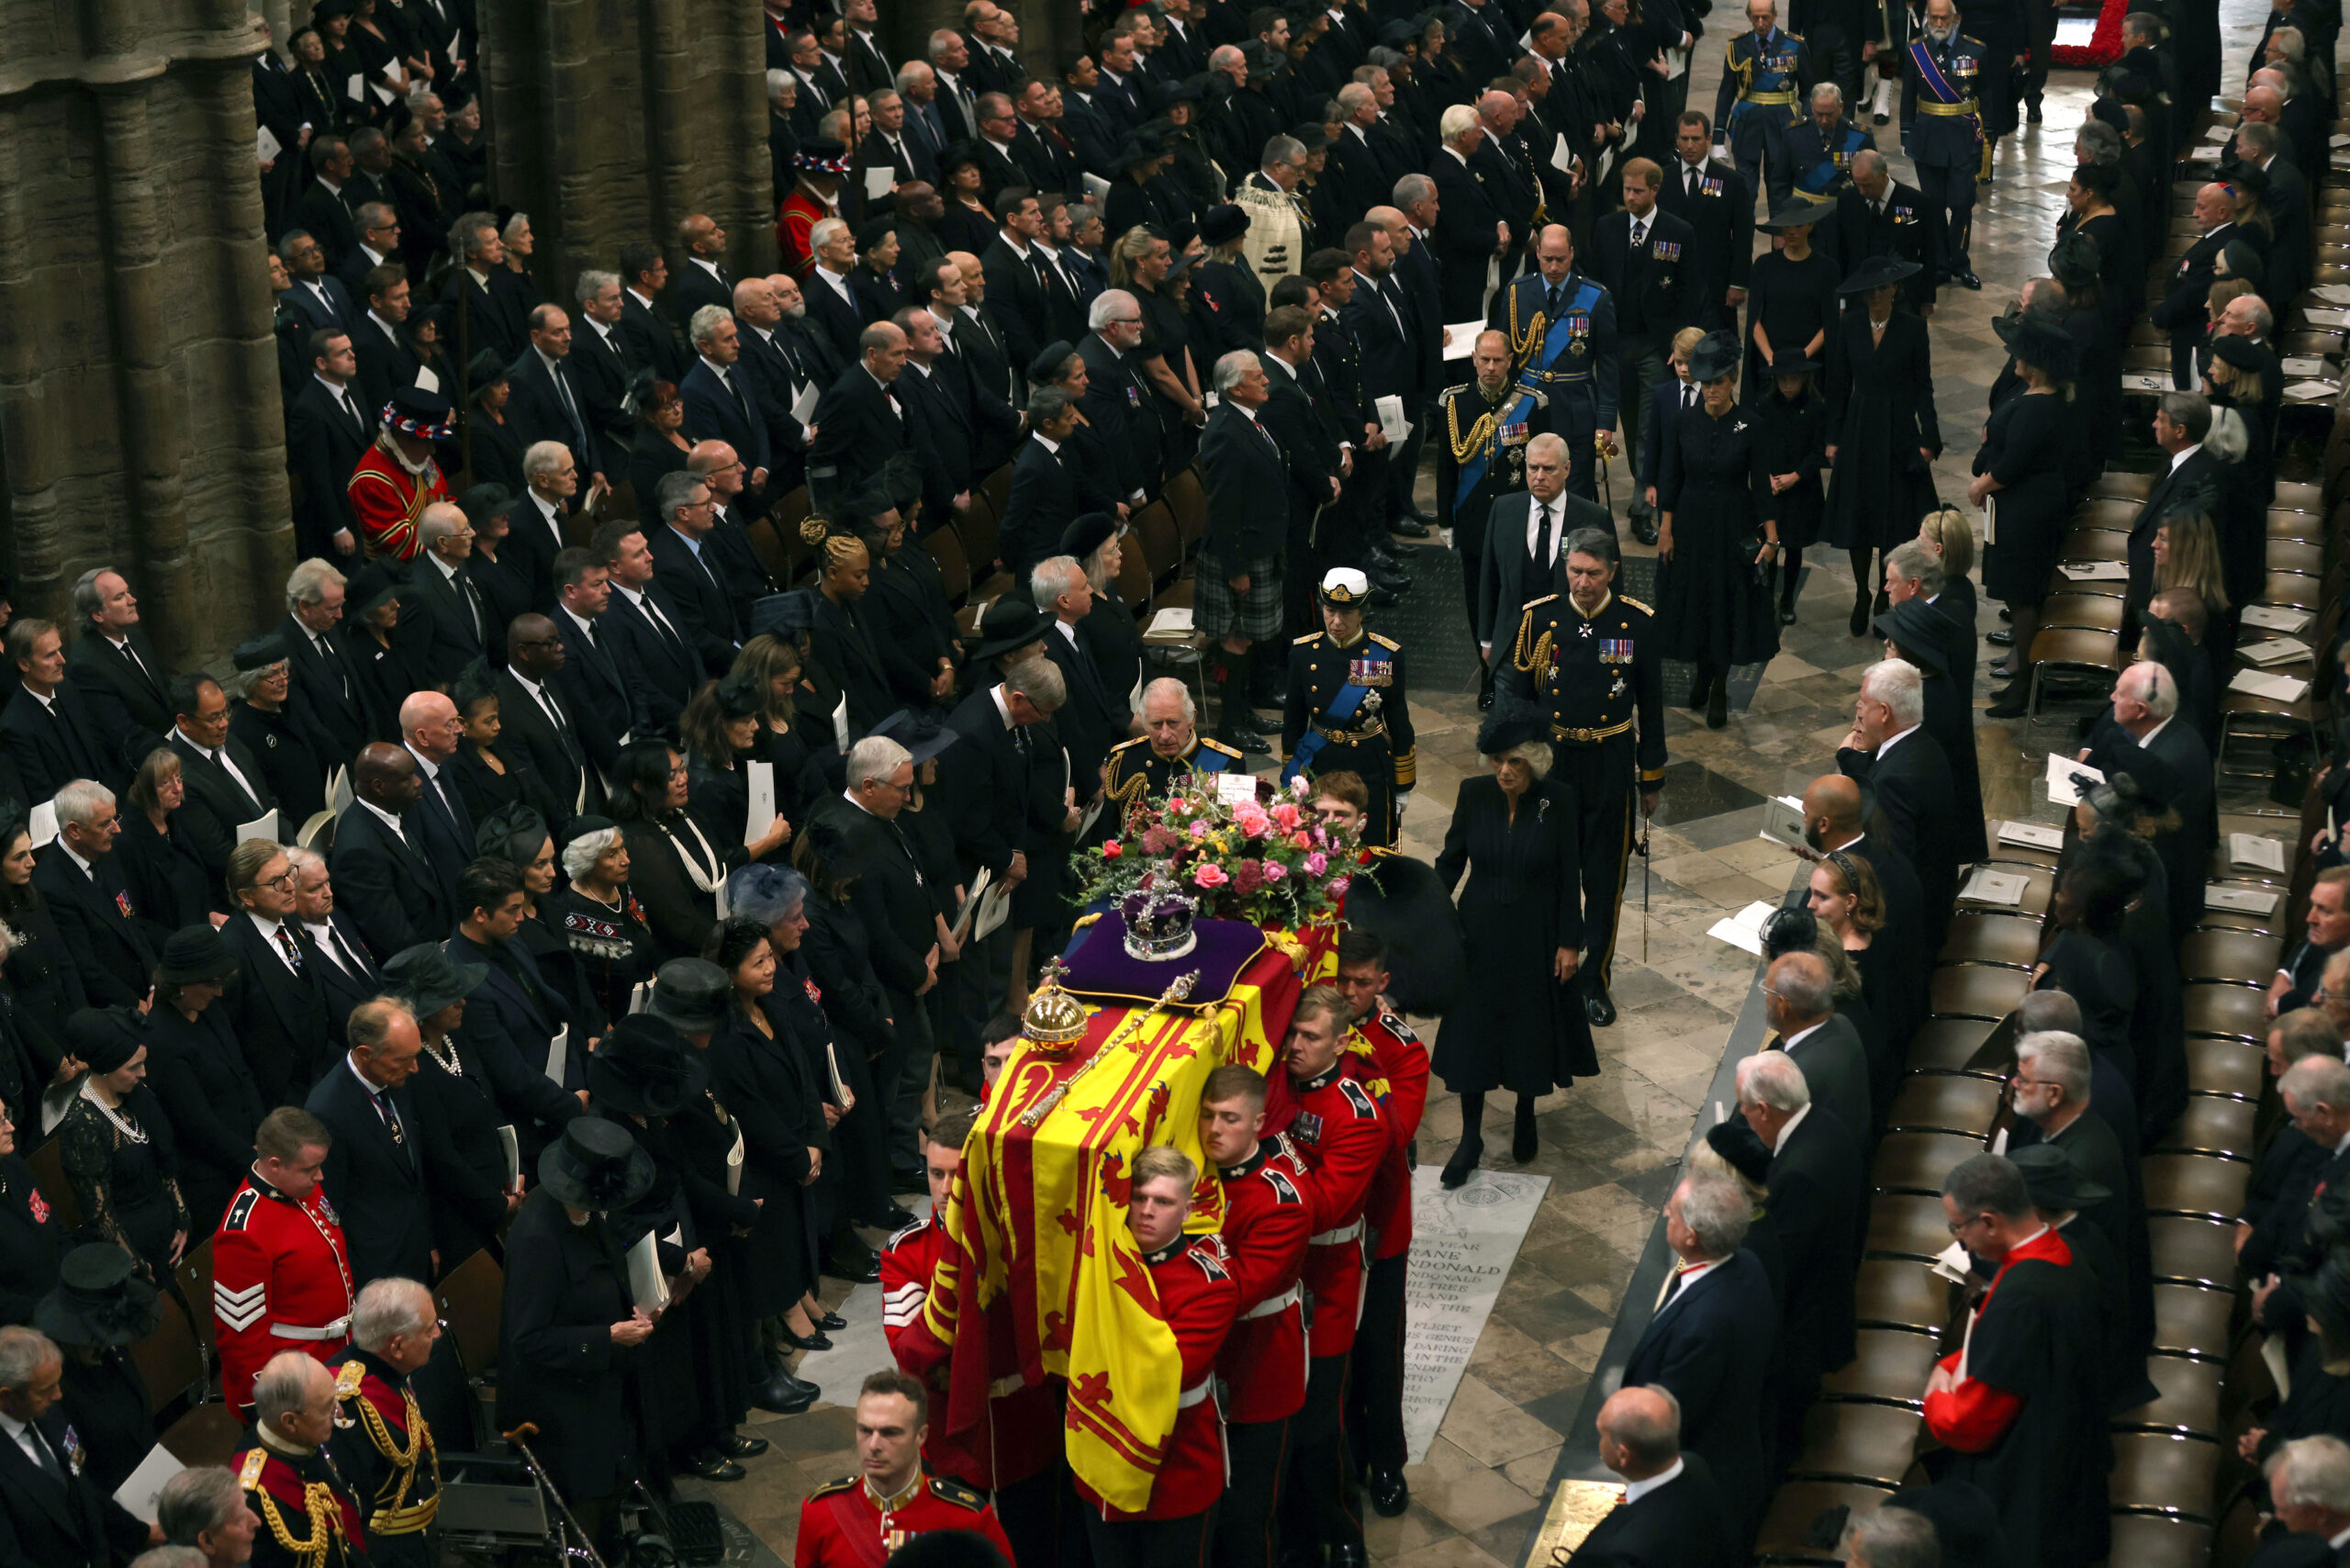 King Charles III, Camilla, Queen Consort and other members of the Royal family follow the coffin of Queen Elizabeth II as it is carried into Westminster Abbey ahead of her State Funeral, in London, Monday Sept. 19, 2022. The Queen, who died aged 96 on Sept. 8, will be buried at Windsor alongside her late husband, Prince Philip, who died last year. (Jack Hill/Pool Photo via AP)